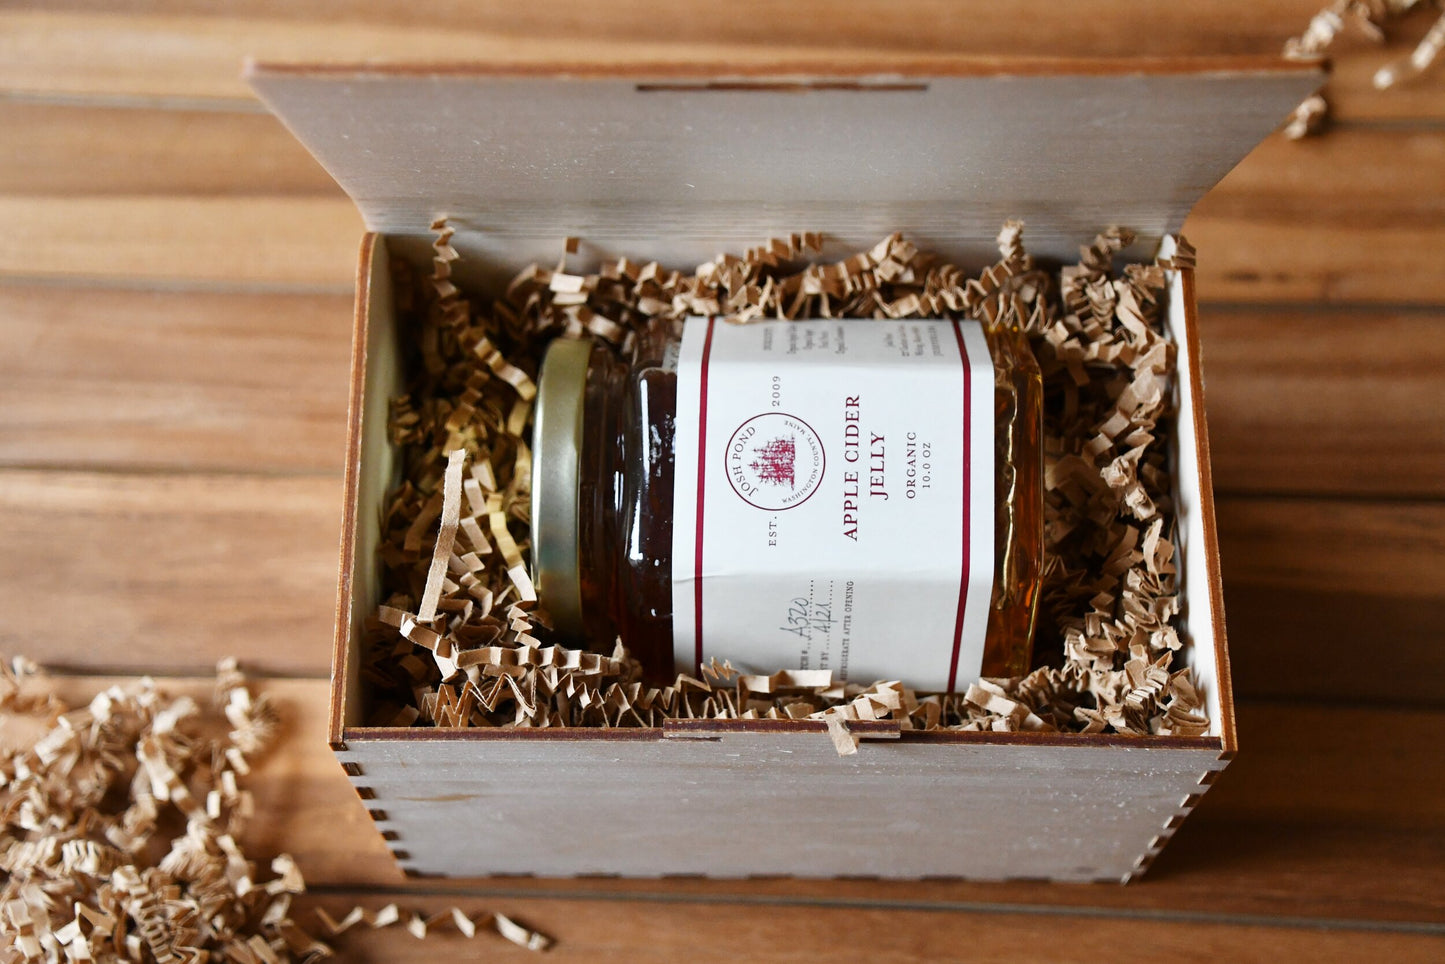 Small Gift Crate - Organic Apple Cider Jelly